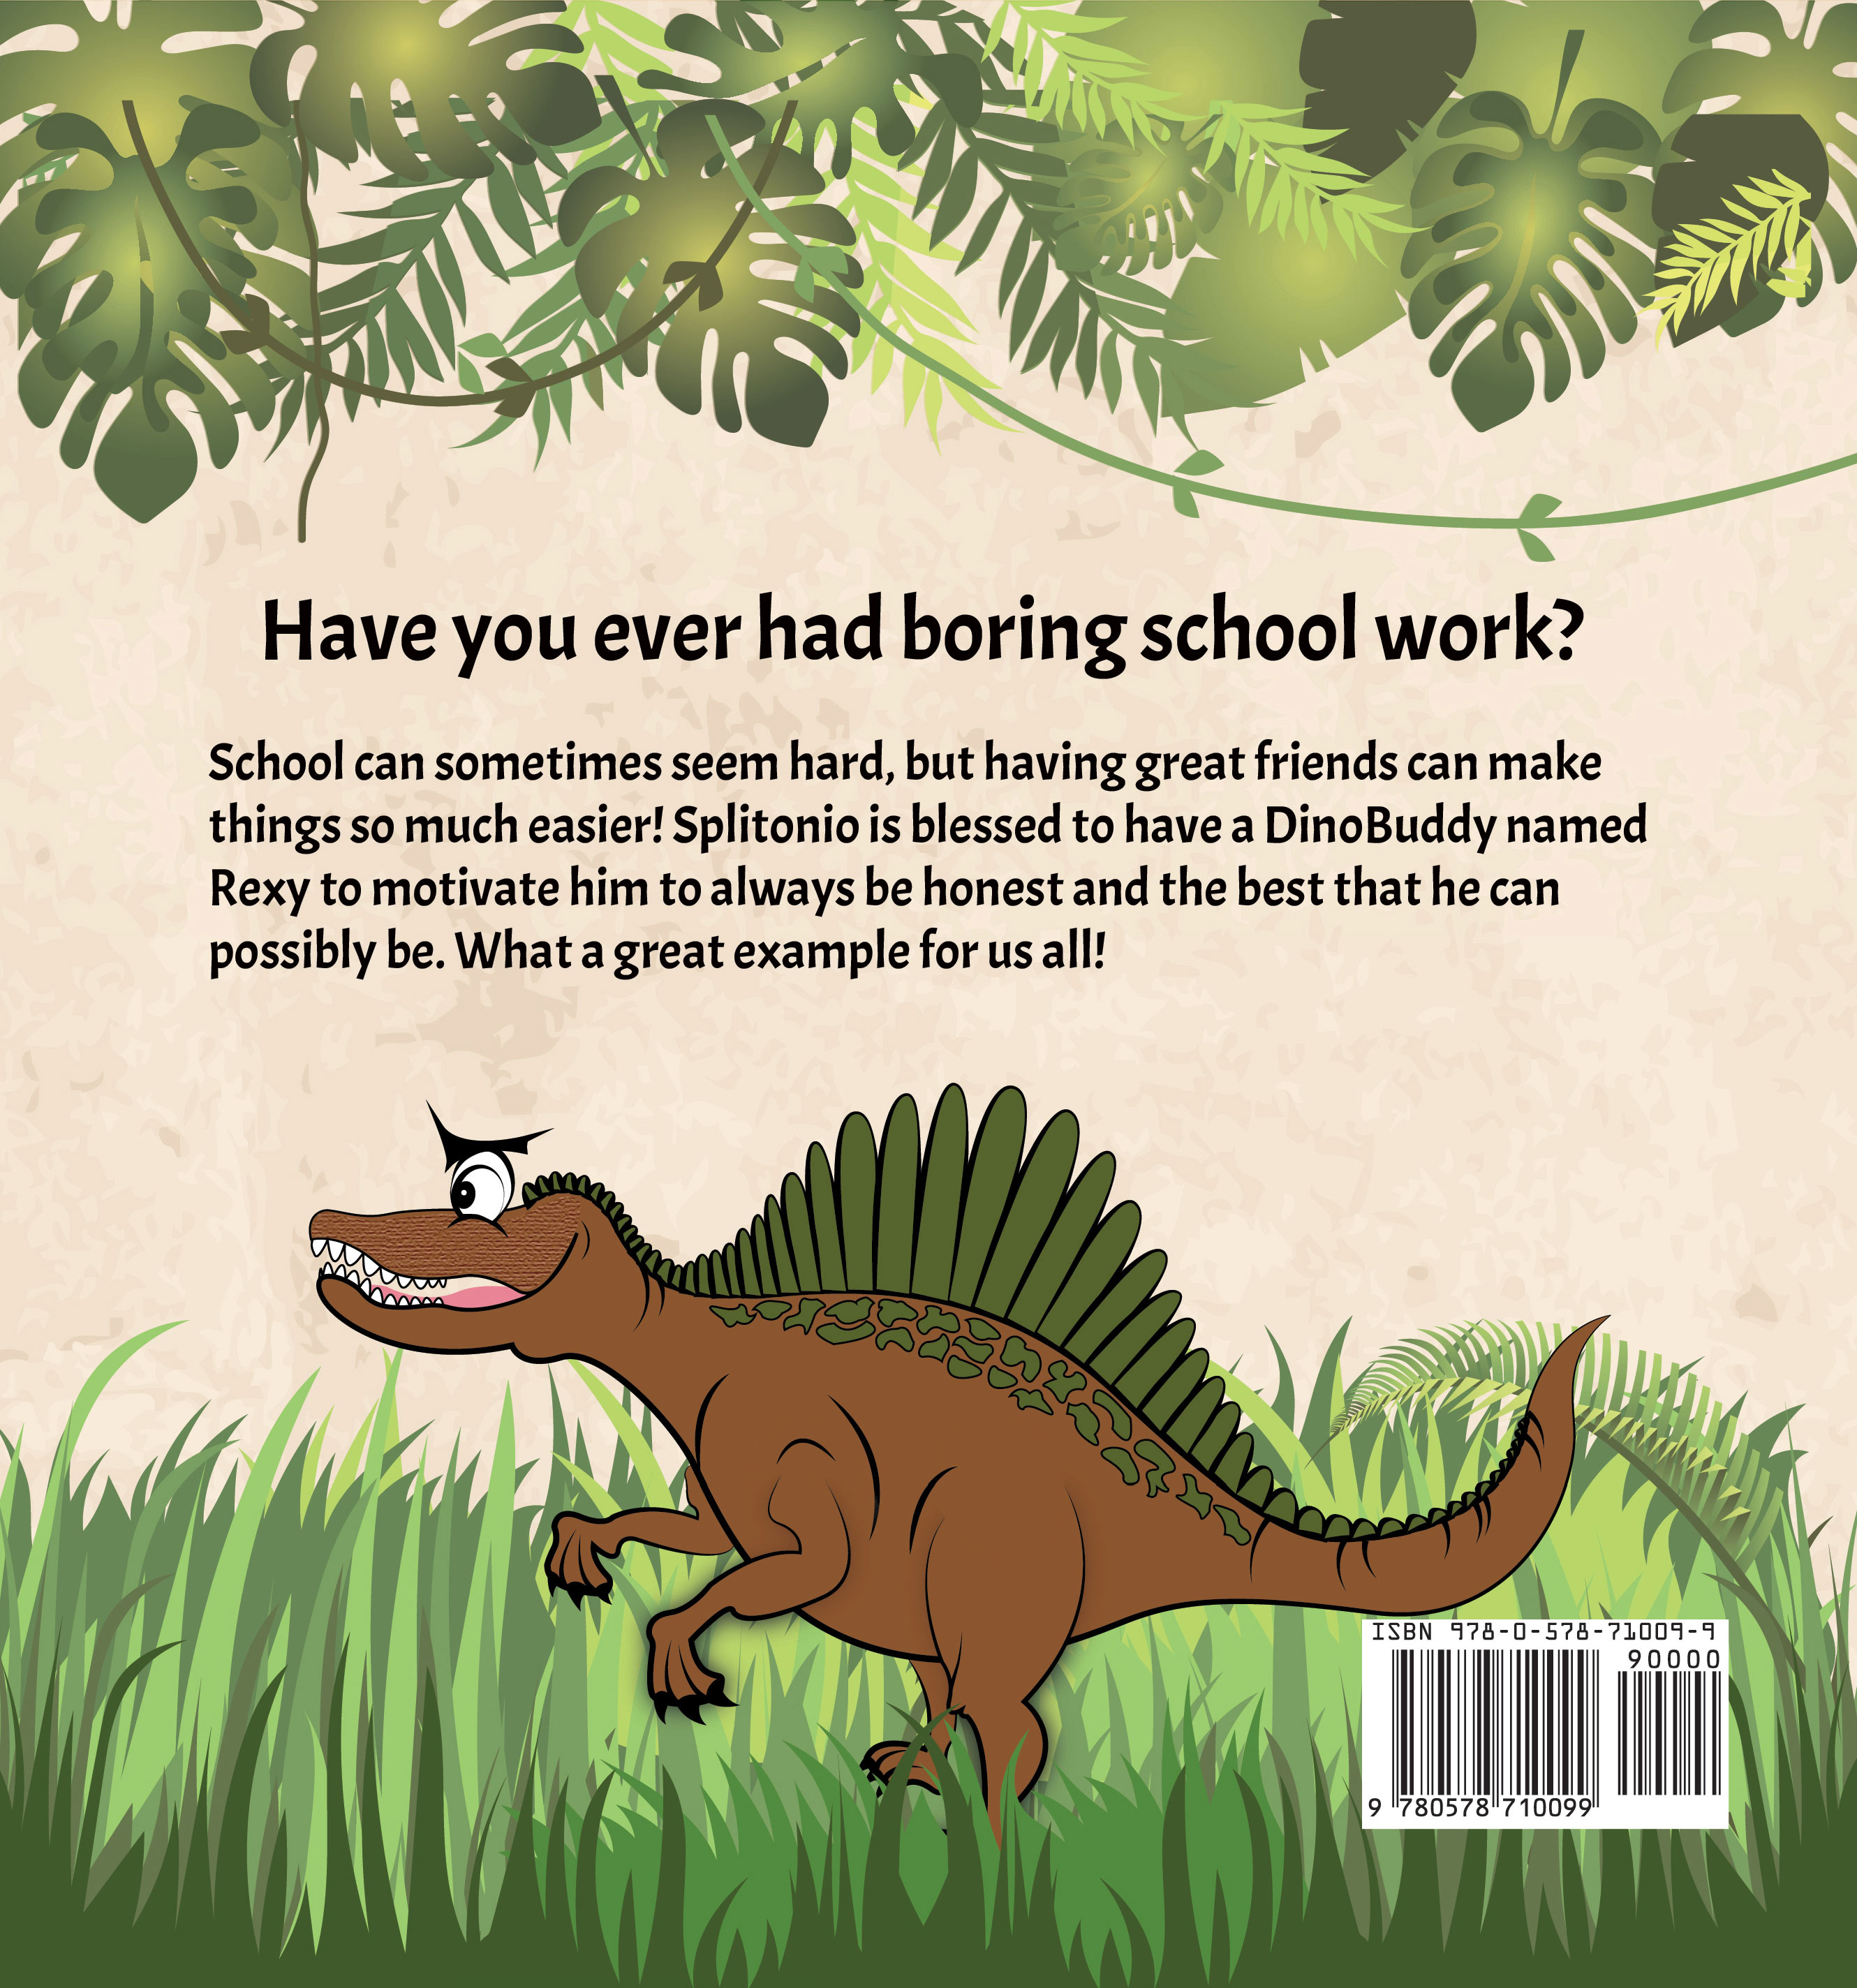 Back Cover of "Splitonio" book - dino with greenery and the words: "Have you ever had boring schoolwork? School can sometimes seem hard, but having great friends can make things so much easier! Splitonio is blessed to have a DinoBuddy named Rexy to motivate him to always be honest and the best that he can possibly be. What a great example for us all!" 